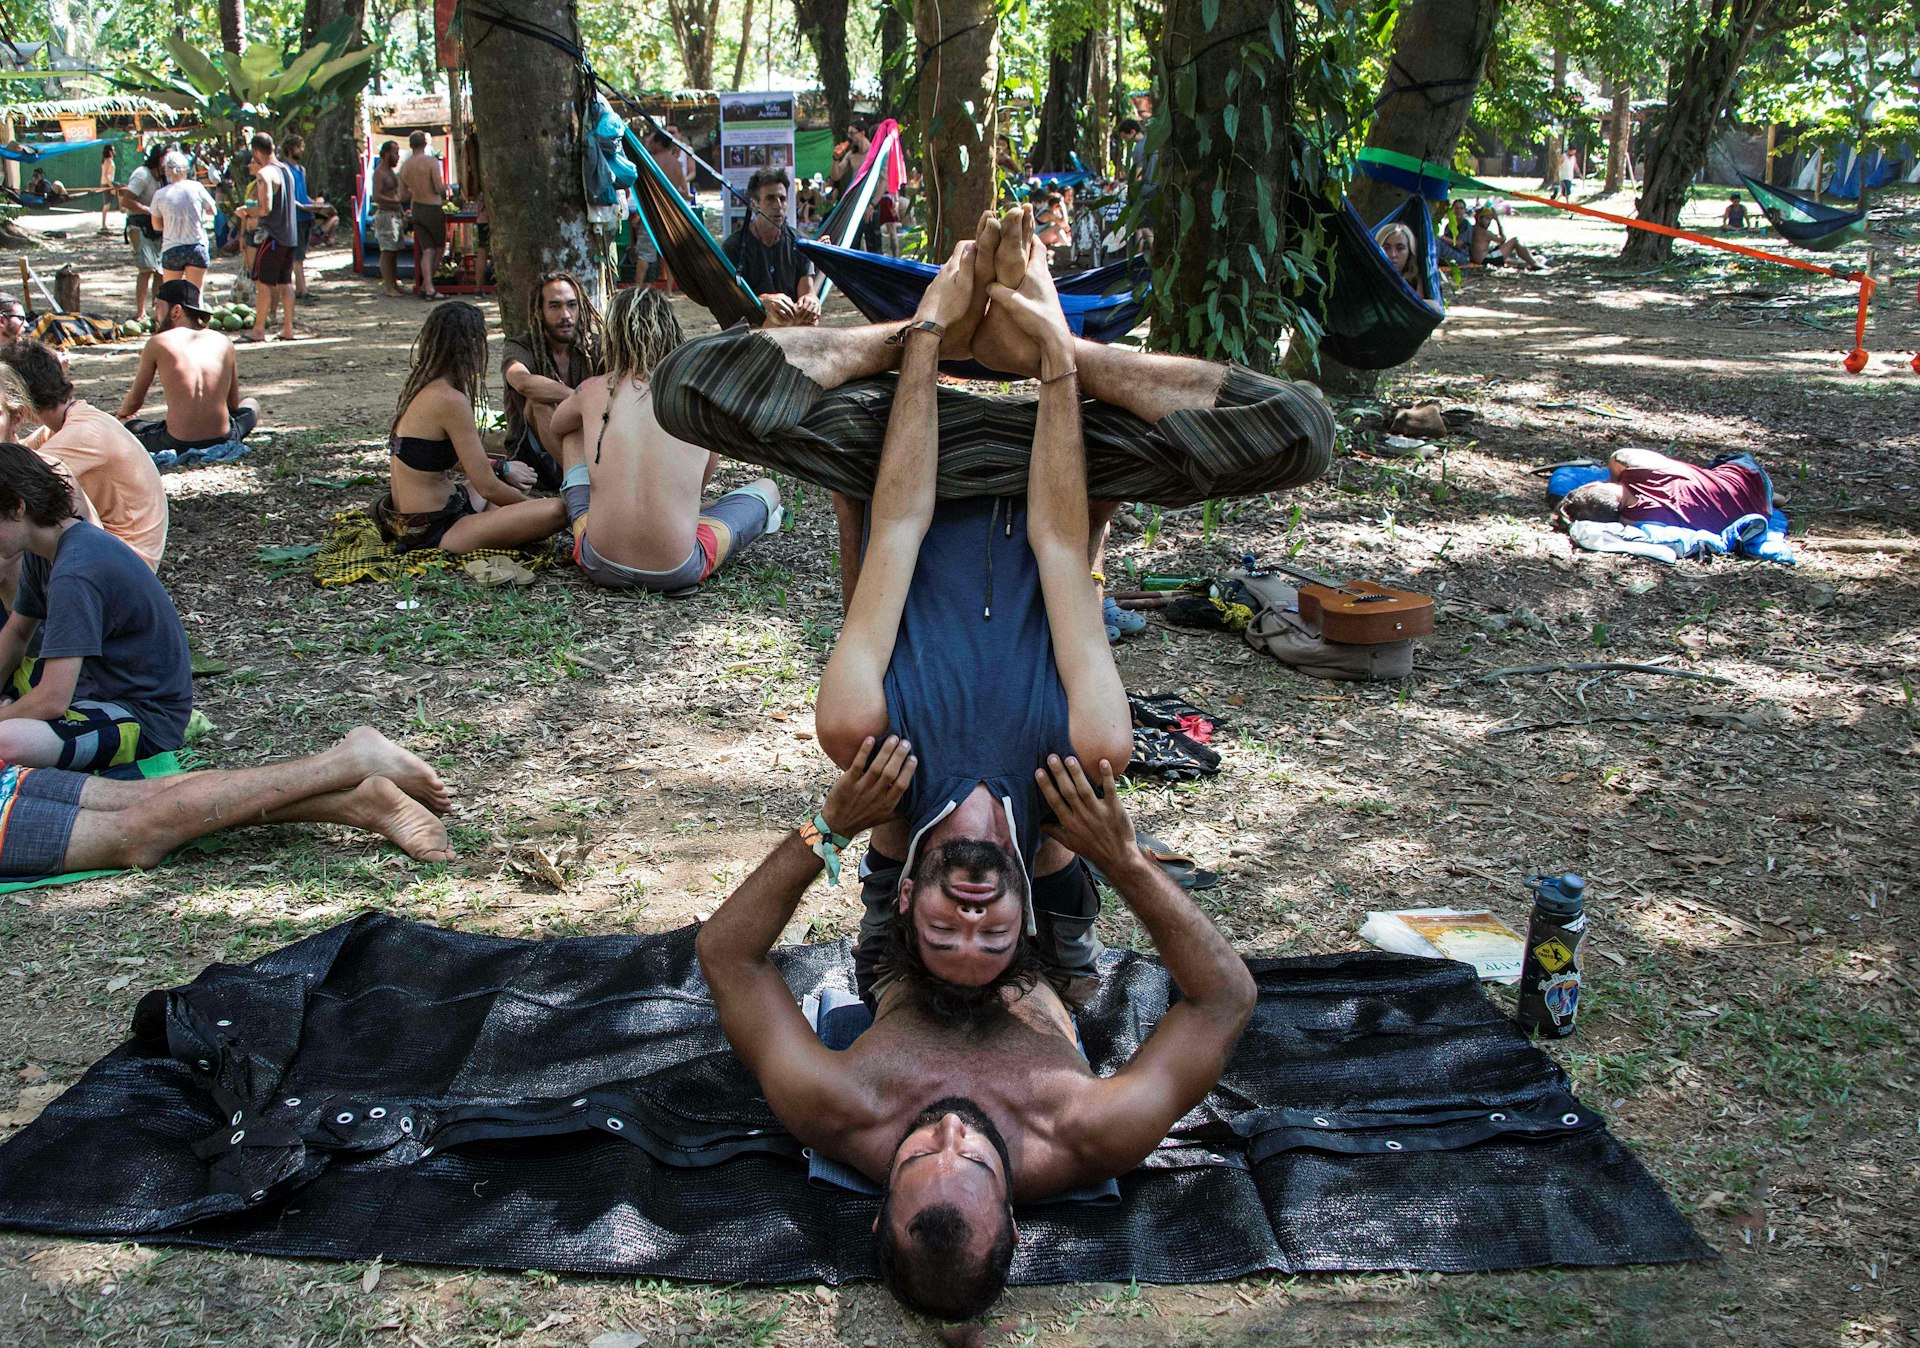 Men practice Acroyoga during the Envision Festival in Puntarenas, Uvita, 149 miles (240 km) south of San Jose, Costa Rica. The festival brings thousands together for yoga, music and other wellness classes. Ezequiel Becerra/Getty Images